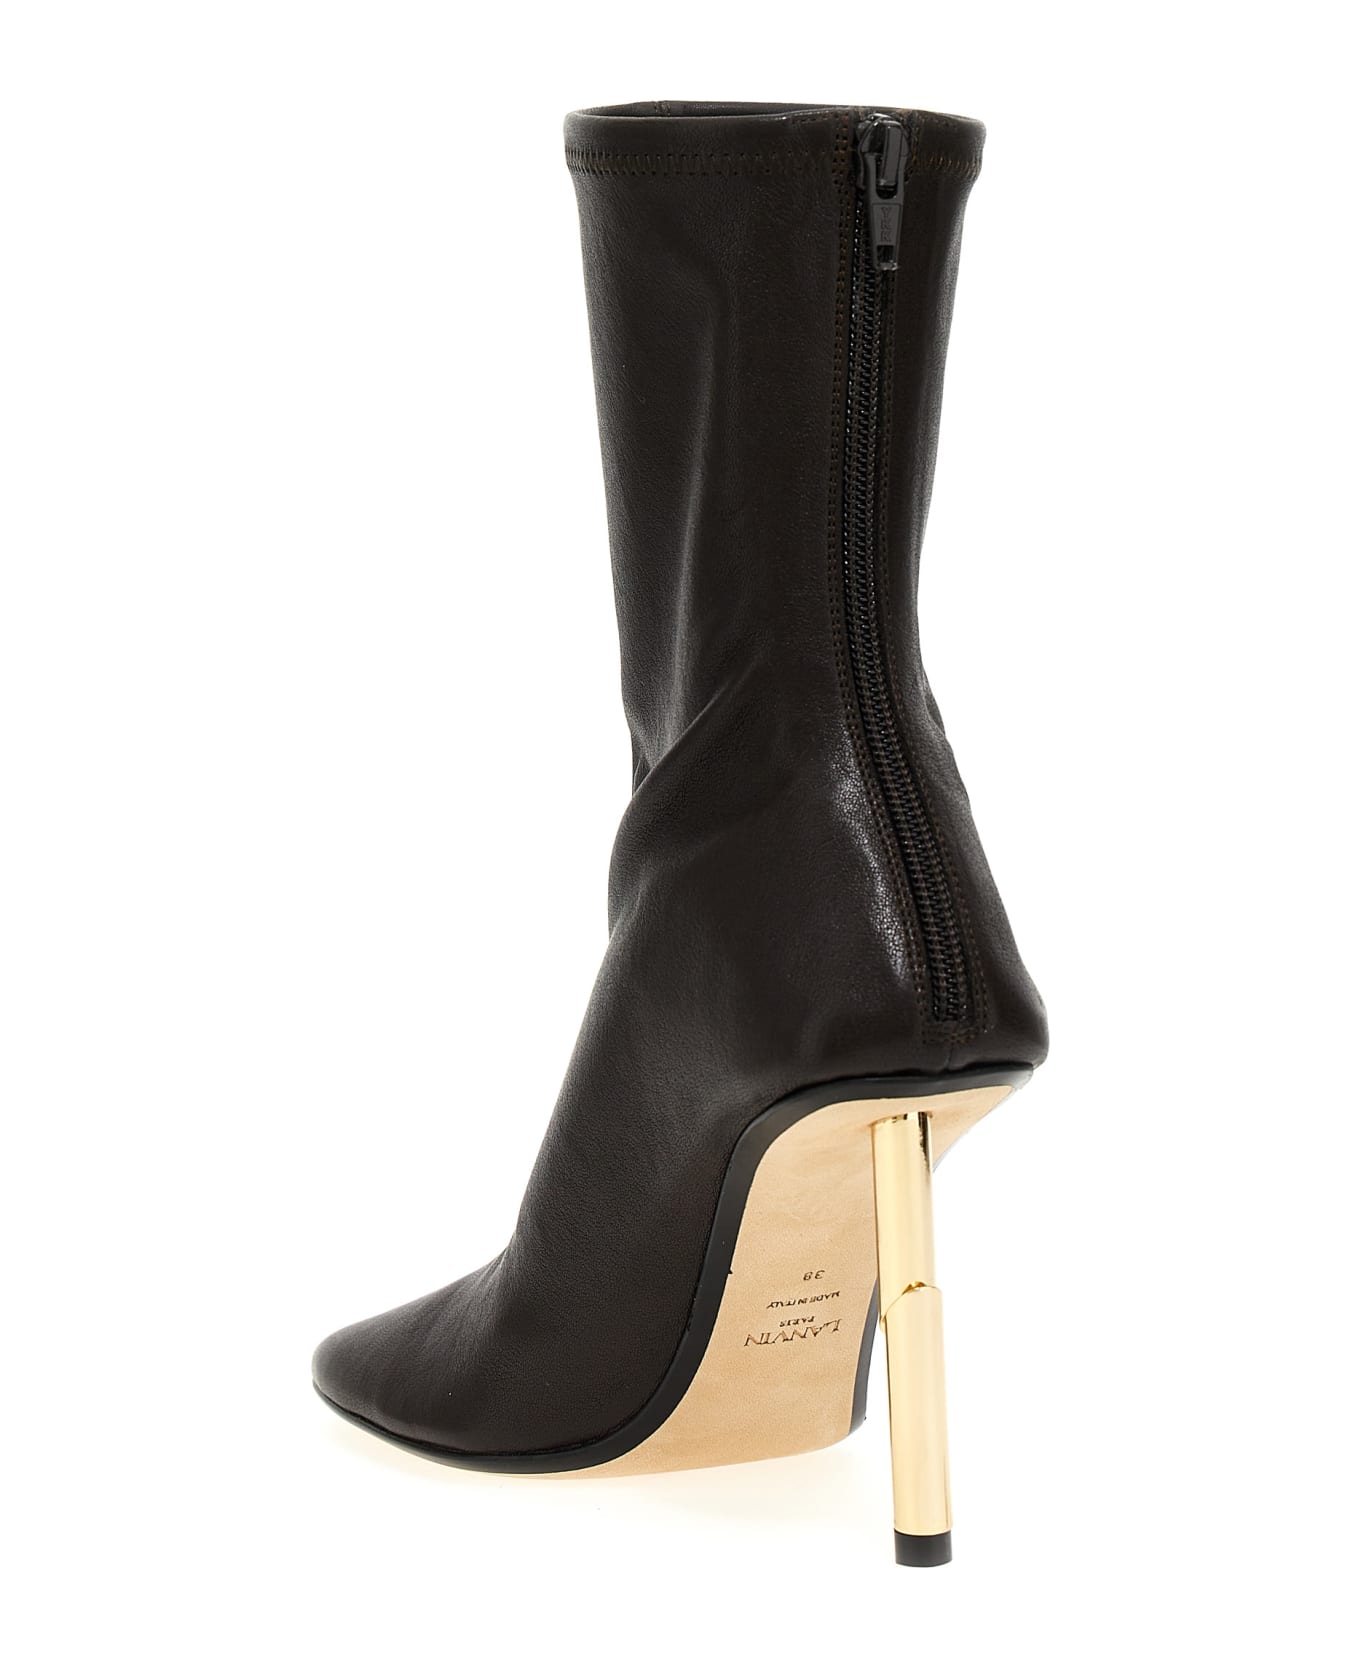 Lanvin 'sequence' Ankle Boots - Brown